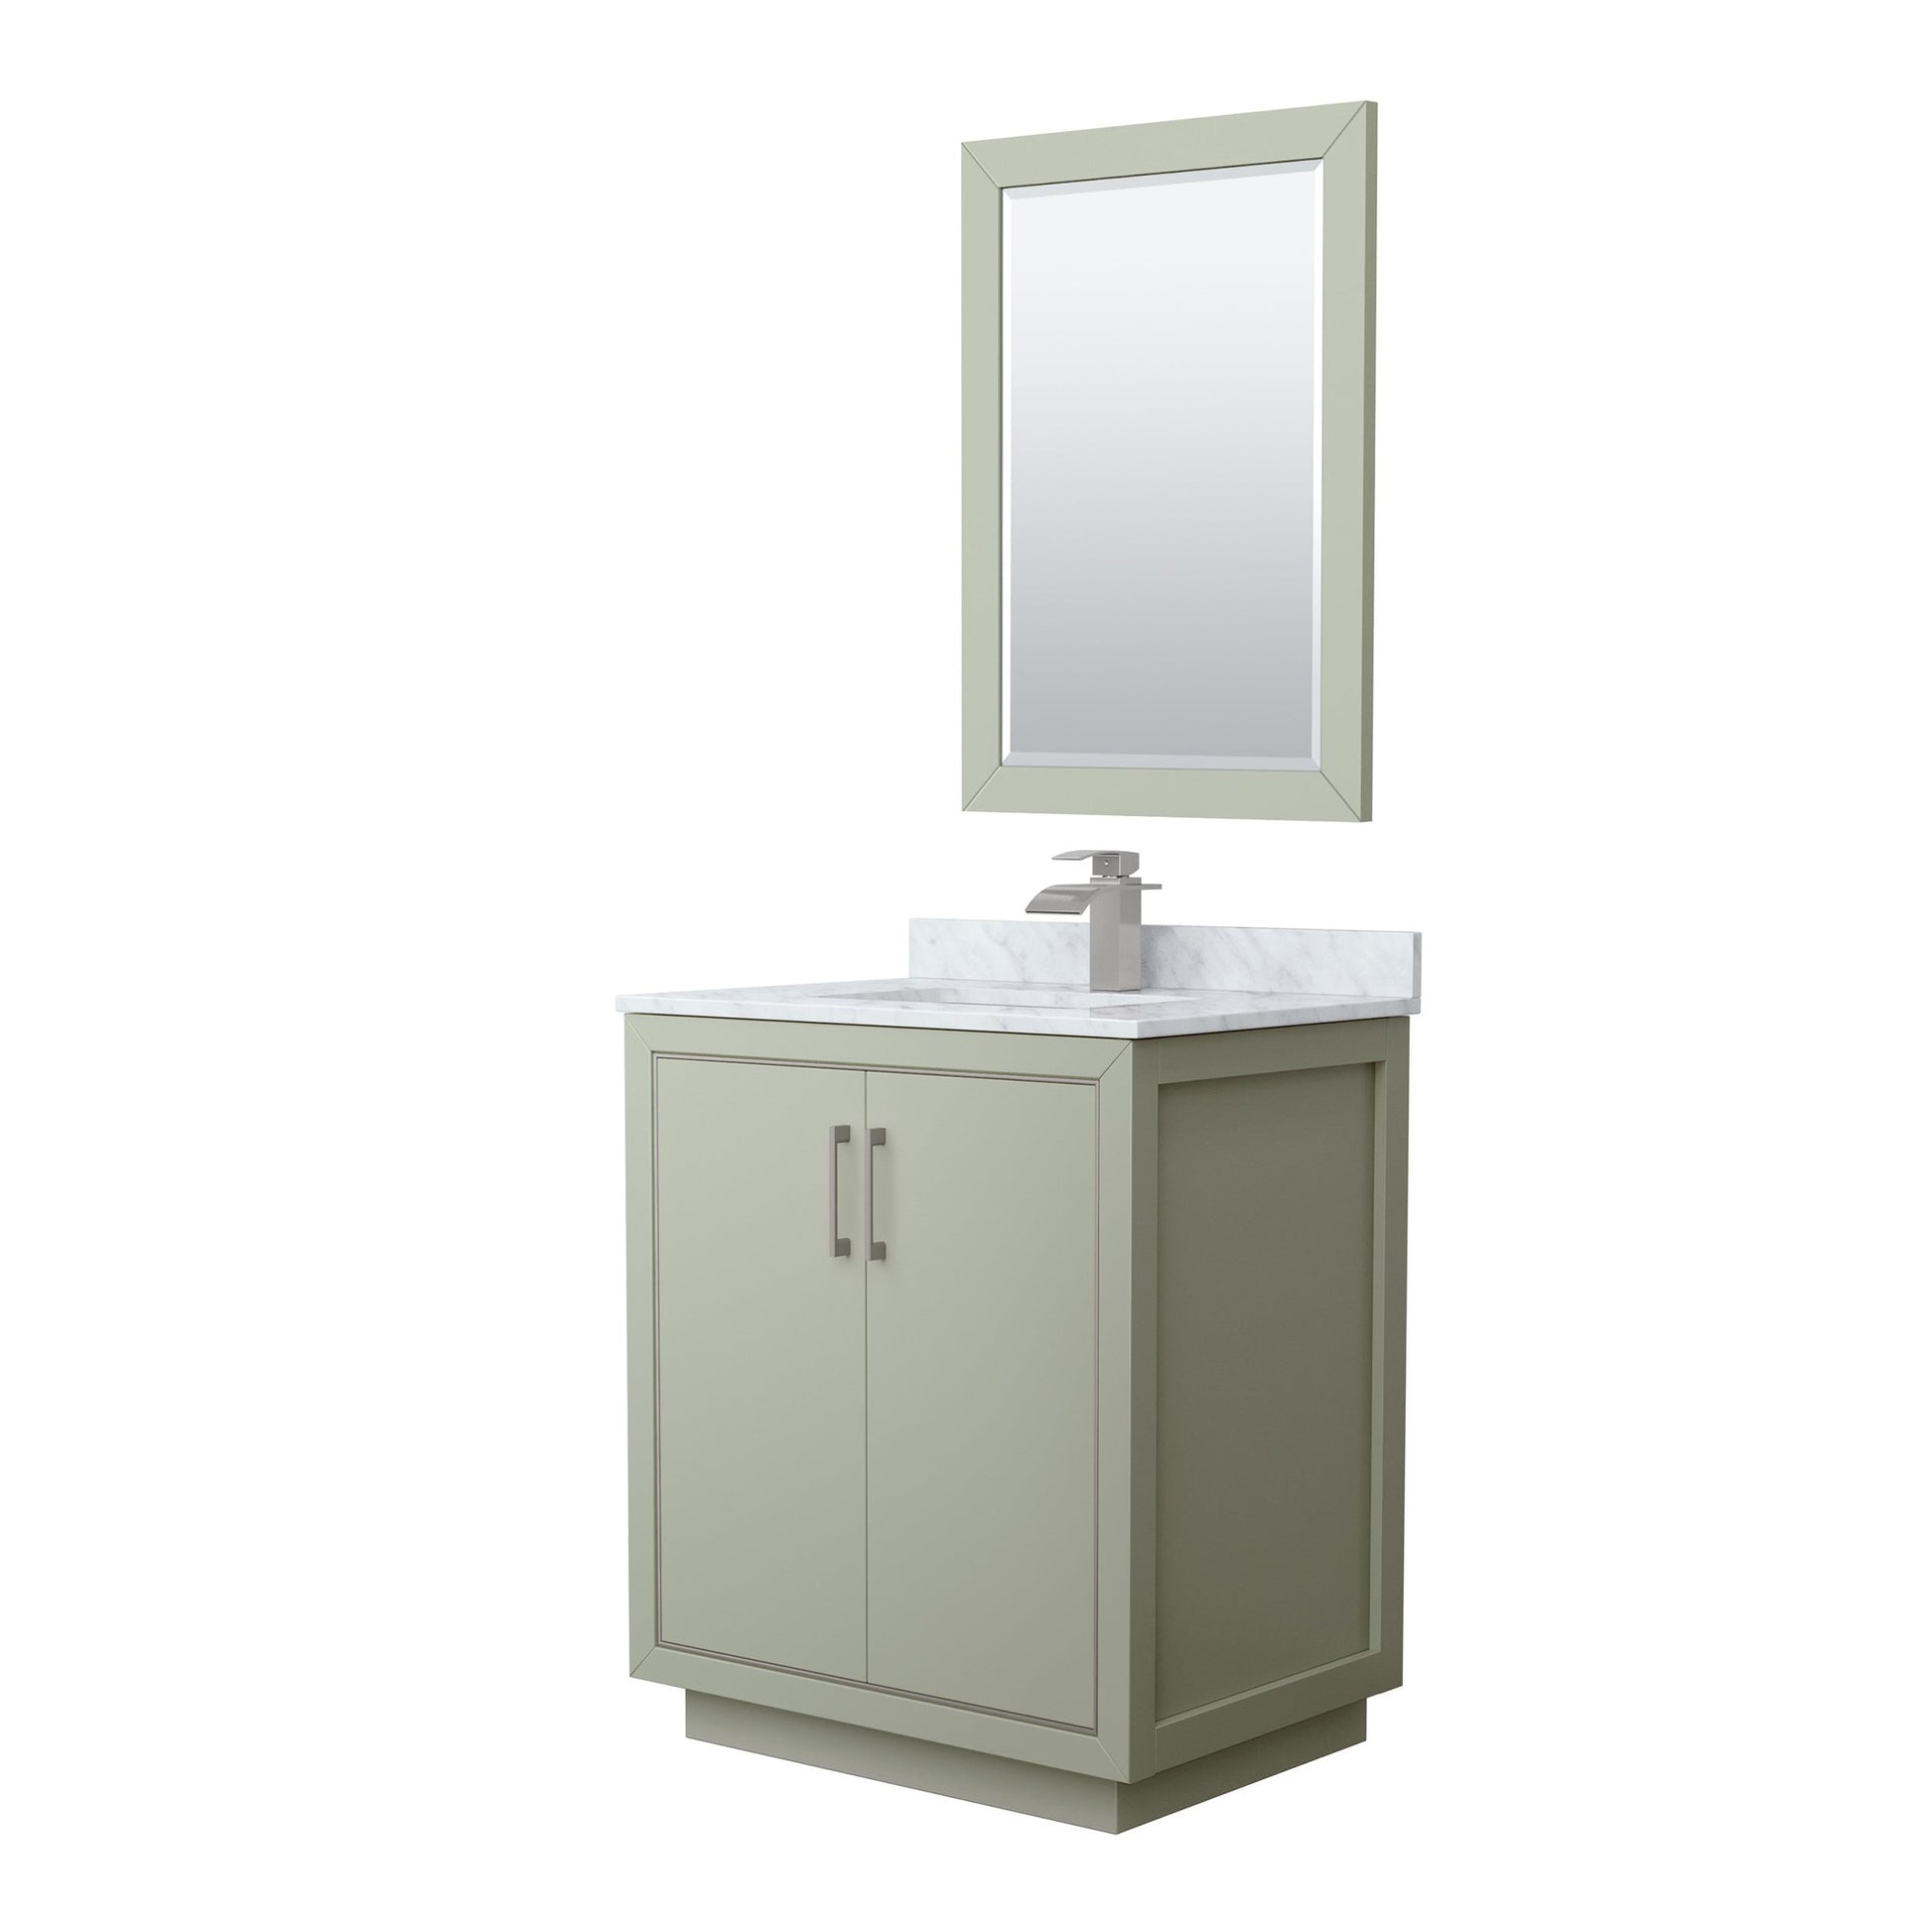 Wyndham Collection Icon 30" Single Bathroom Vanity in Light Green, White Carrara Marble Countertop, Undermount Square Sink, Brushed Nickel Trim, 24" Mirror